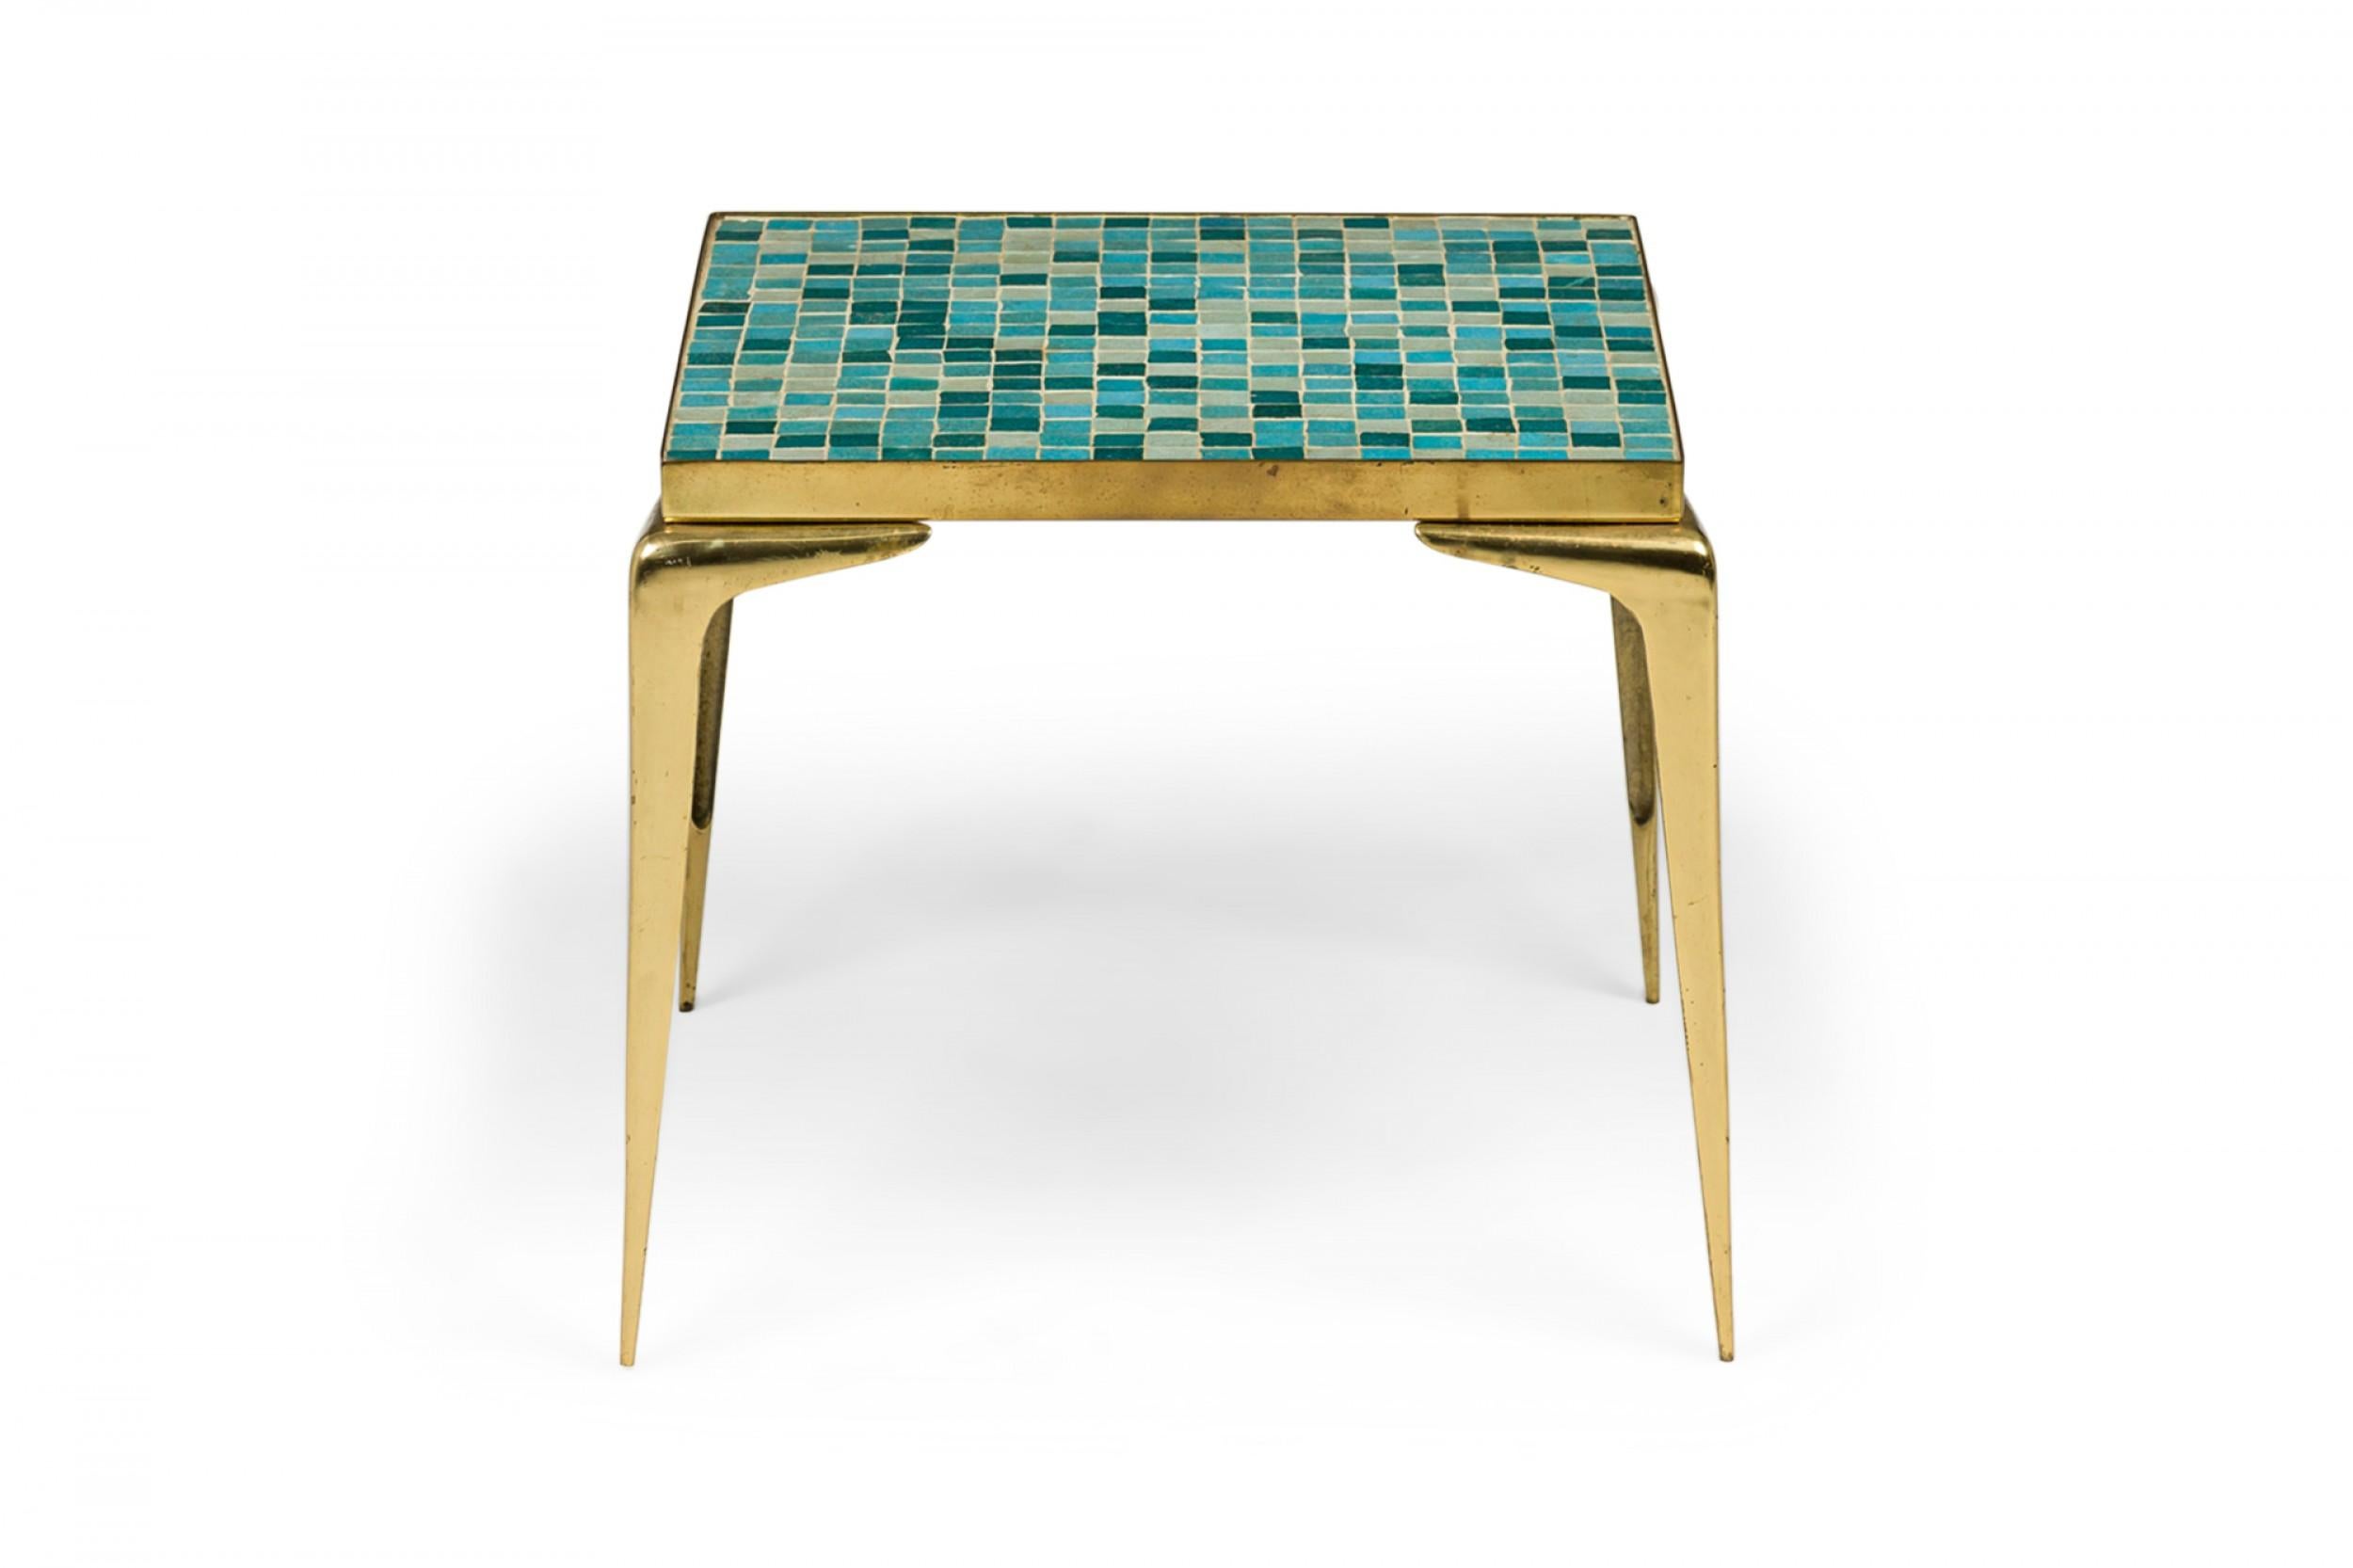 Japanese mid-century end / side table with a Murano glass tiled top in varied shades of blue and gray, resting on a shaped brass frame with four tapered legs.
 